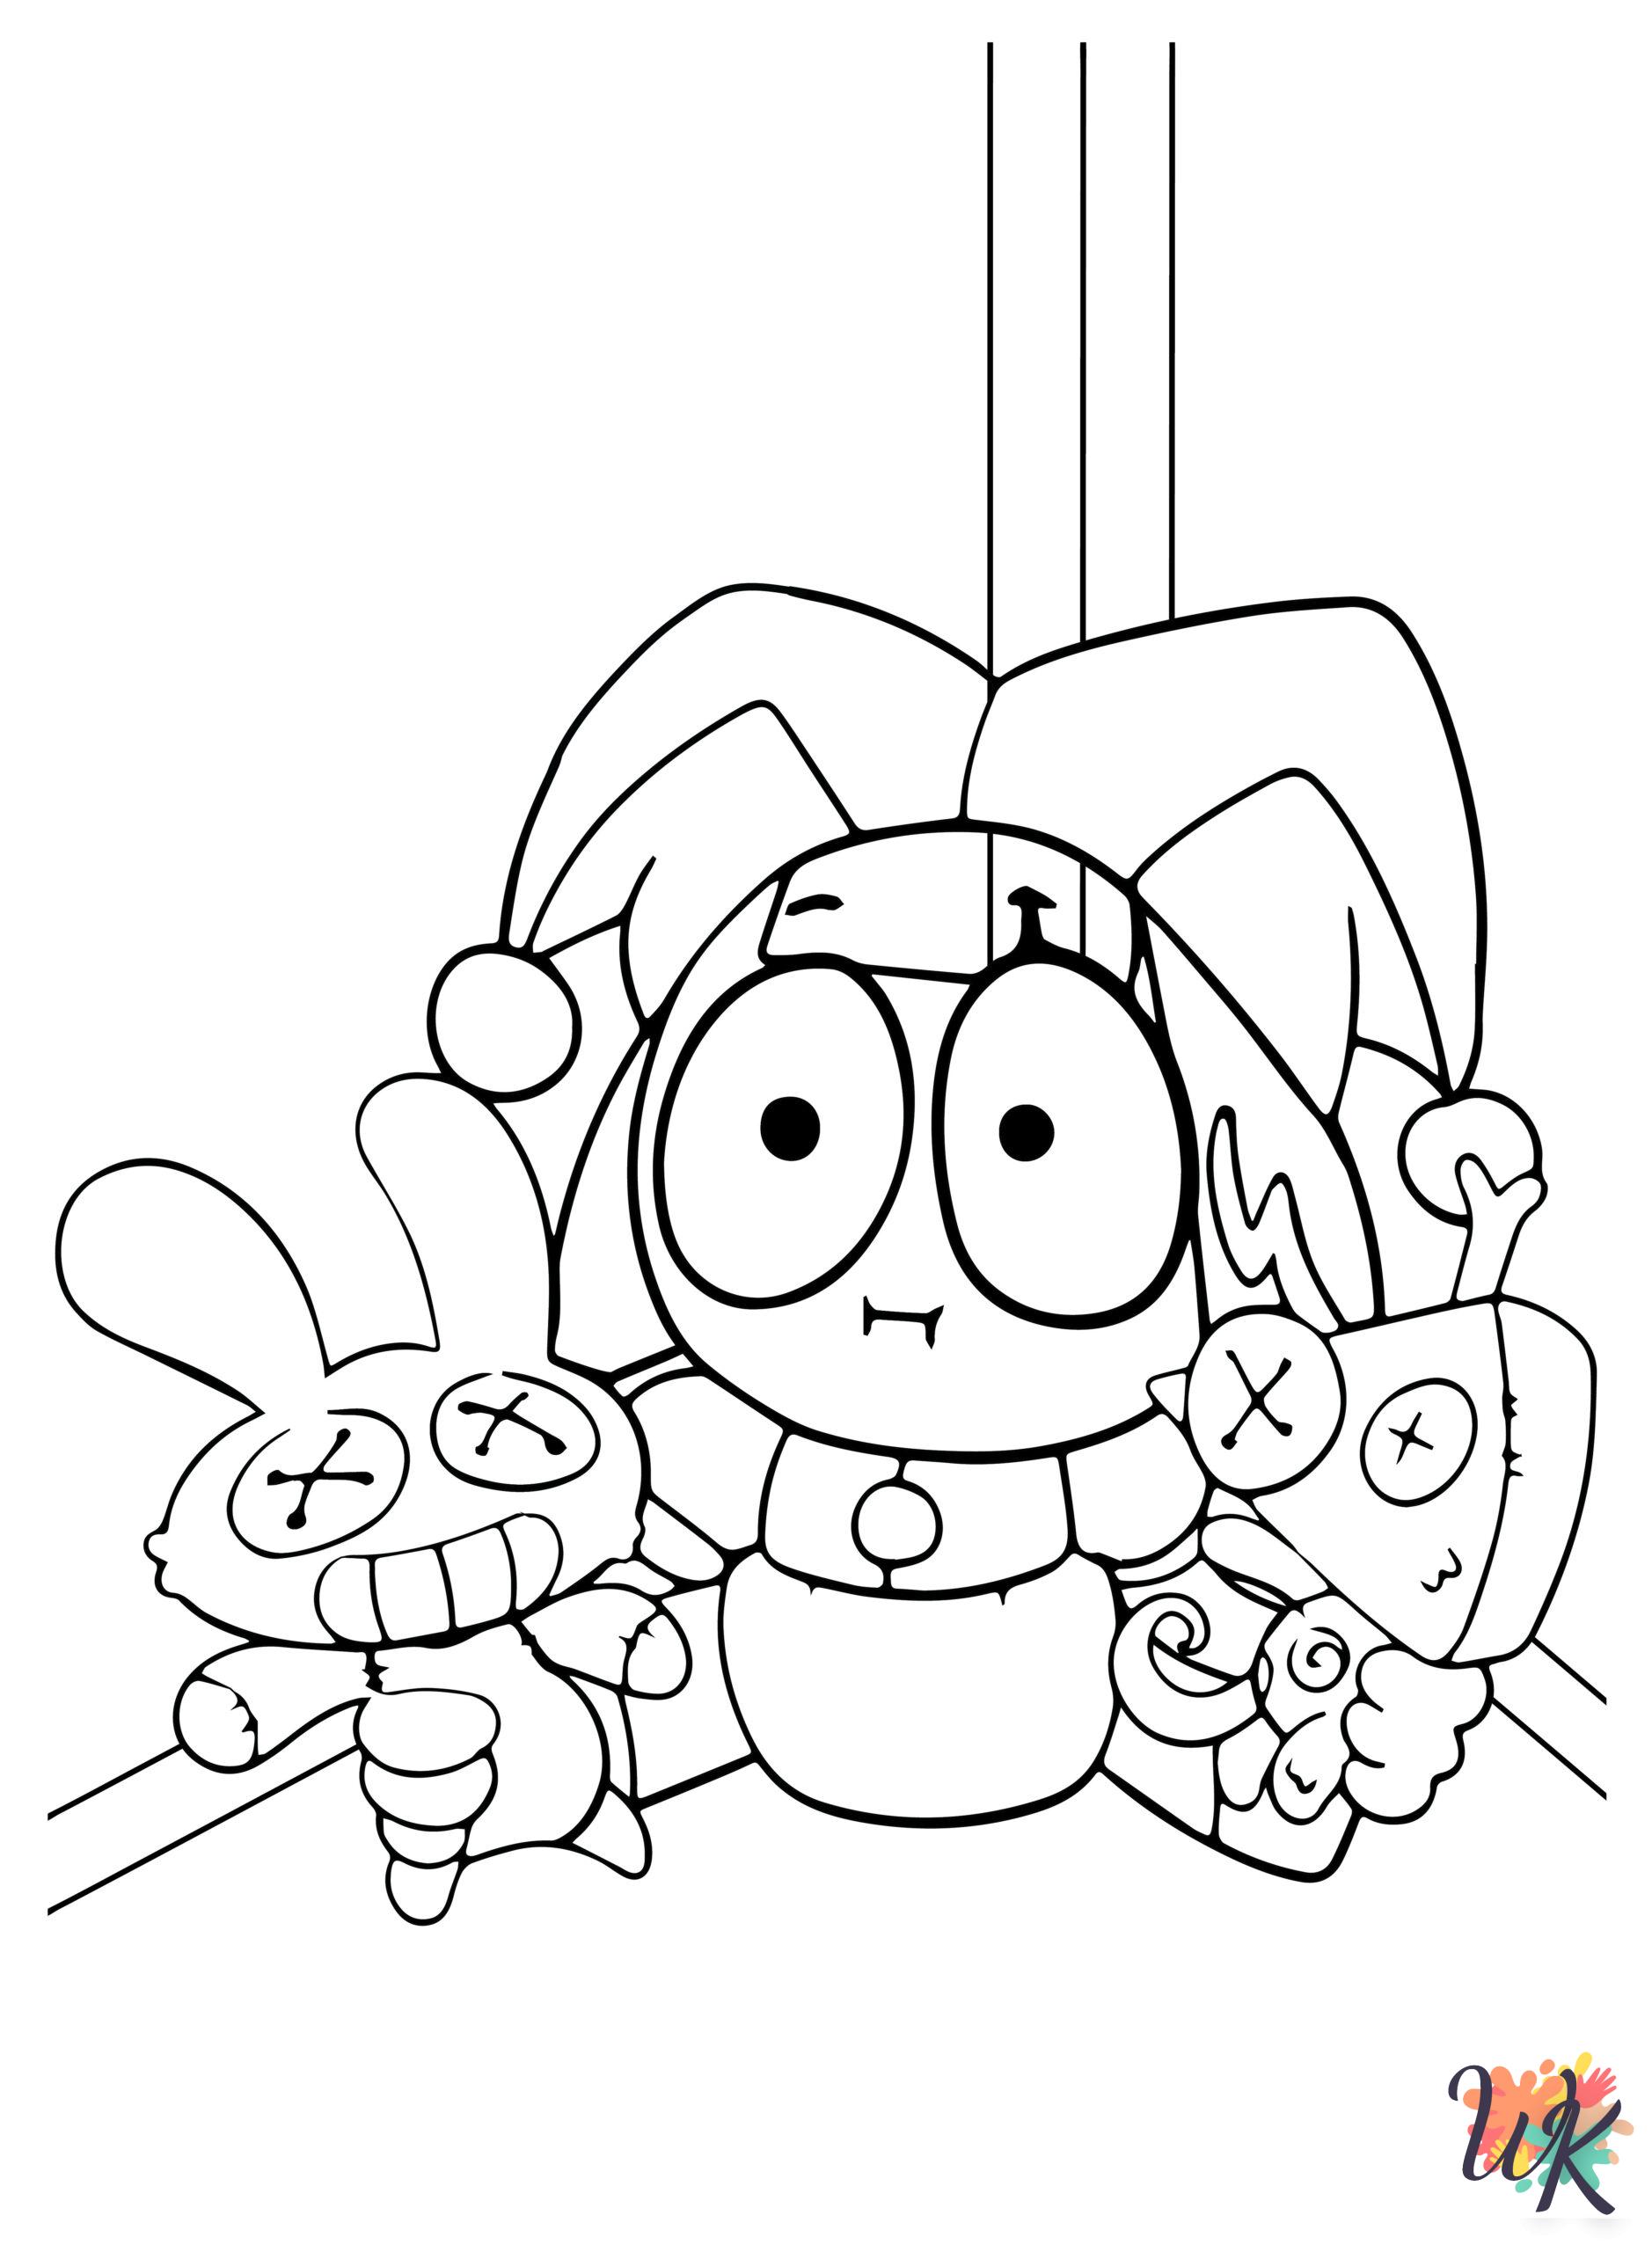 The Amazing Digital Circus coloring pages for kids